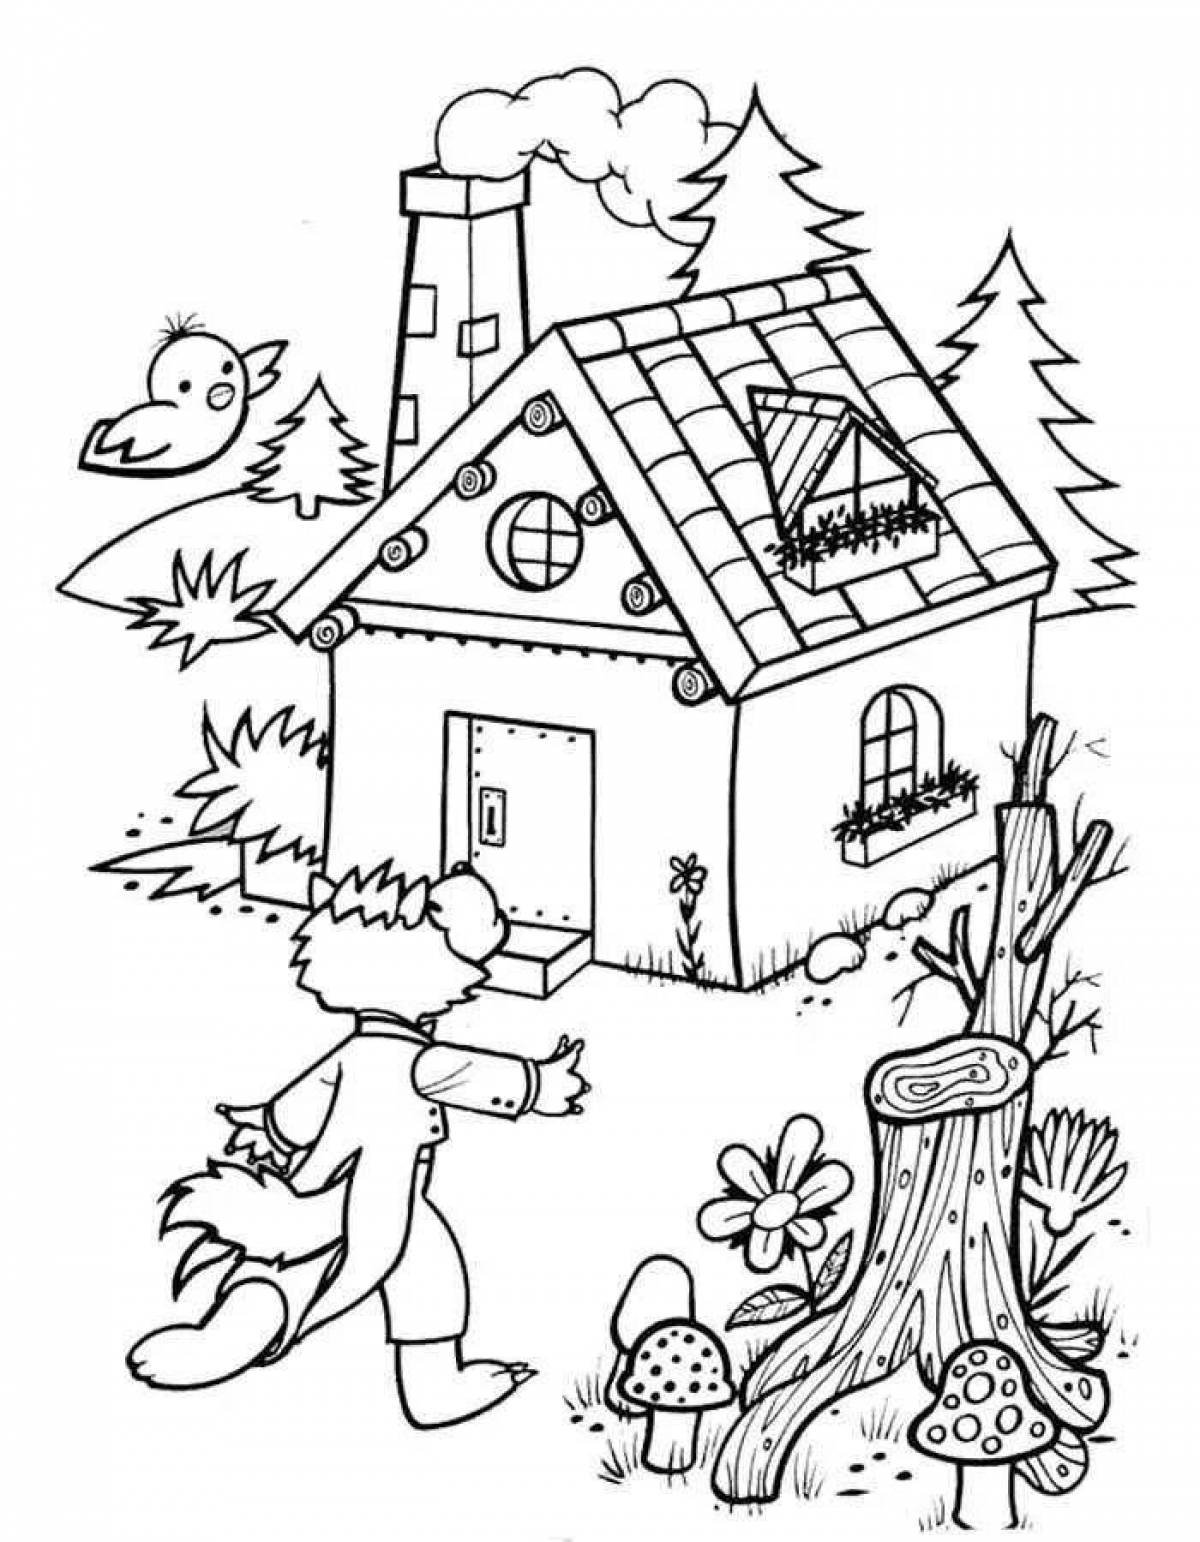 Dreamy forest house coloring book